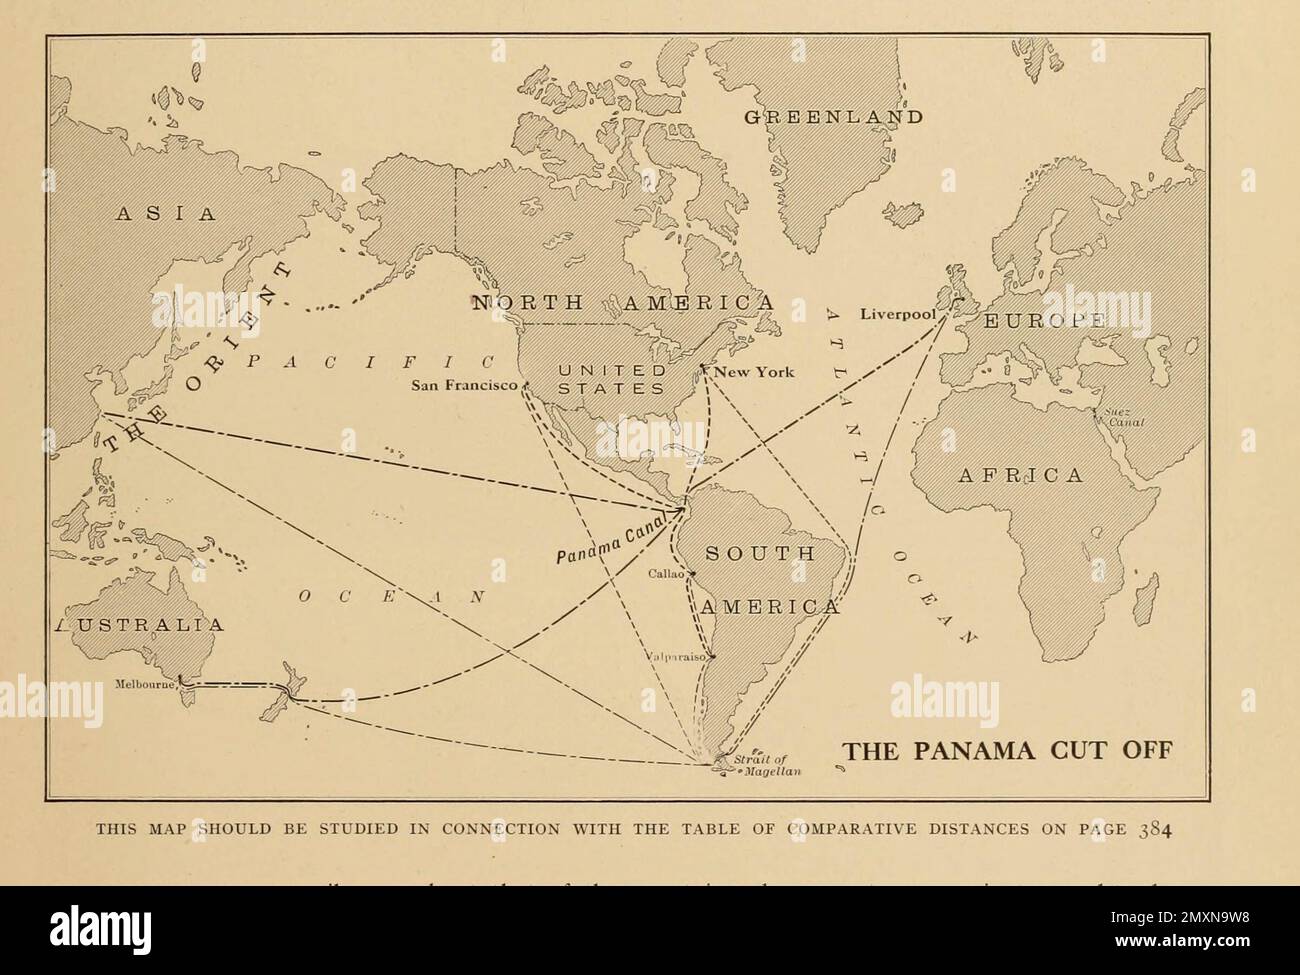 Map of the Panama Cutoff from the book Panama and the Canal in picture and prose : a complete story of Panama, as well as the history, purpose and promise of its world-famous canal the most gigantic engineering undertaking since the dawn of time by Willis John Abbot,1863-1934 Published in London ; New York by Syndicate Publishing Co. in 1913 Stock Photo